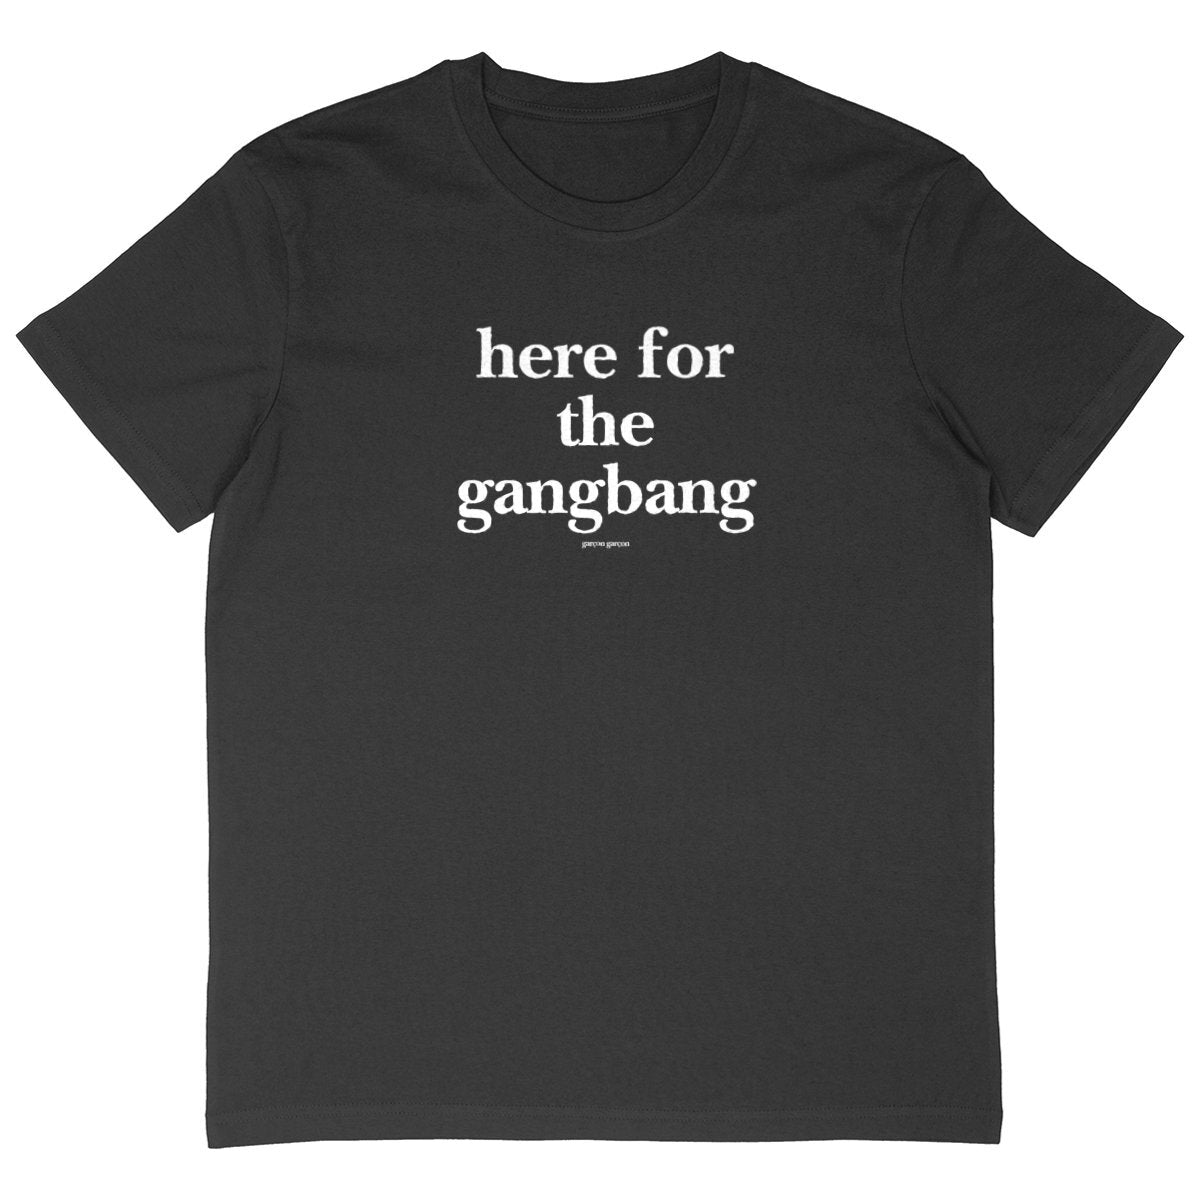 here for the gangbang tee oversized. garçon garçon tee oversize BLACK. Dive into the essence of Parisian cool with this oversized tee. The subtle 'garçon garçon' signature whispers a chic narrative, offering a slice of the city's famed elegance. Perfect for those who speak style with simplicity.